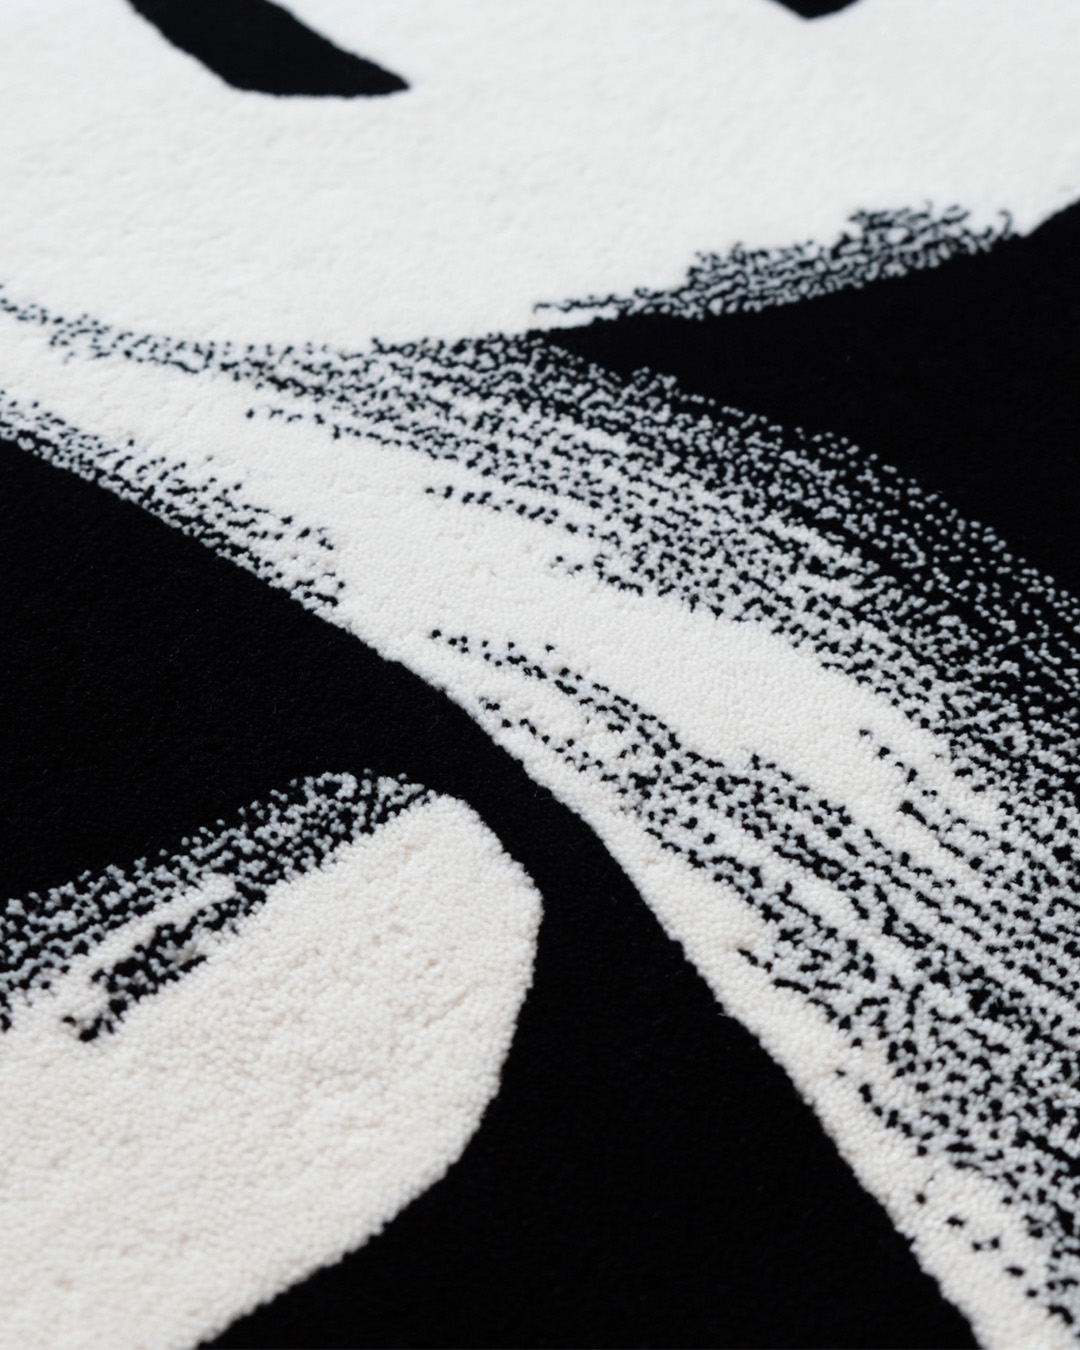 Detailed image of indigenous Womens Gathering rug by Minnie Pwerle in black and white colour